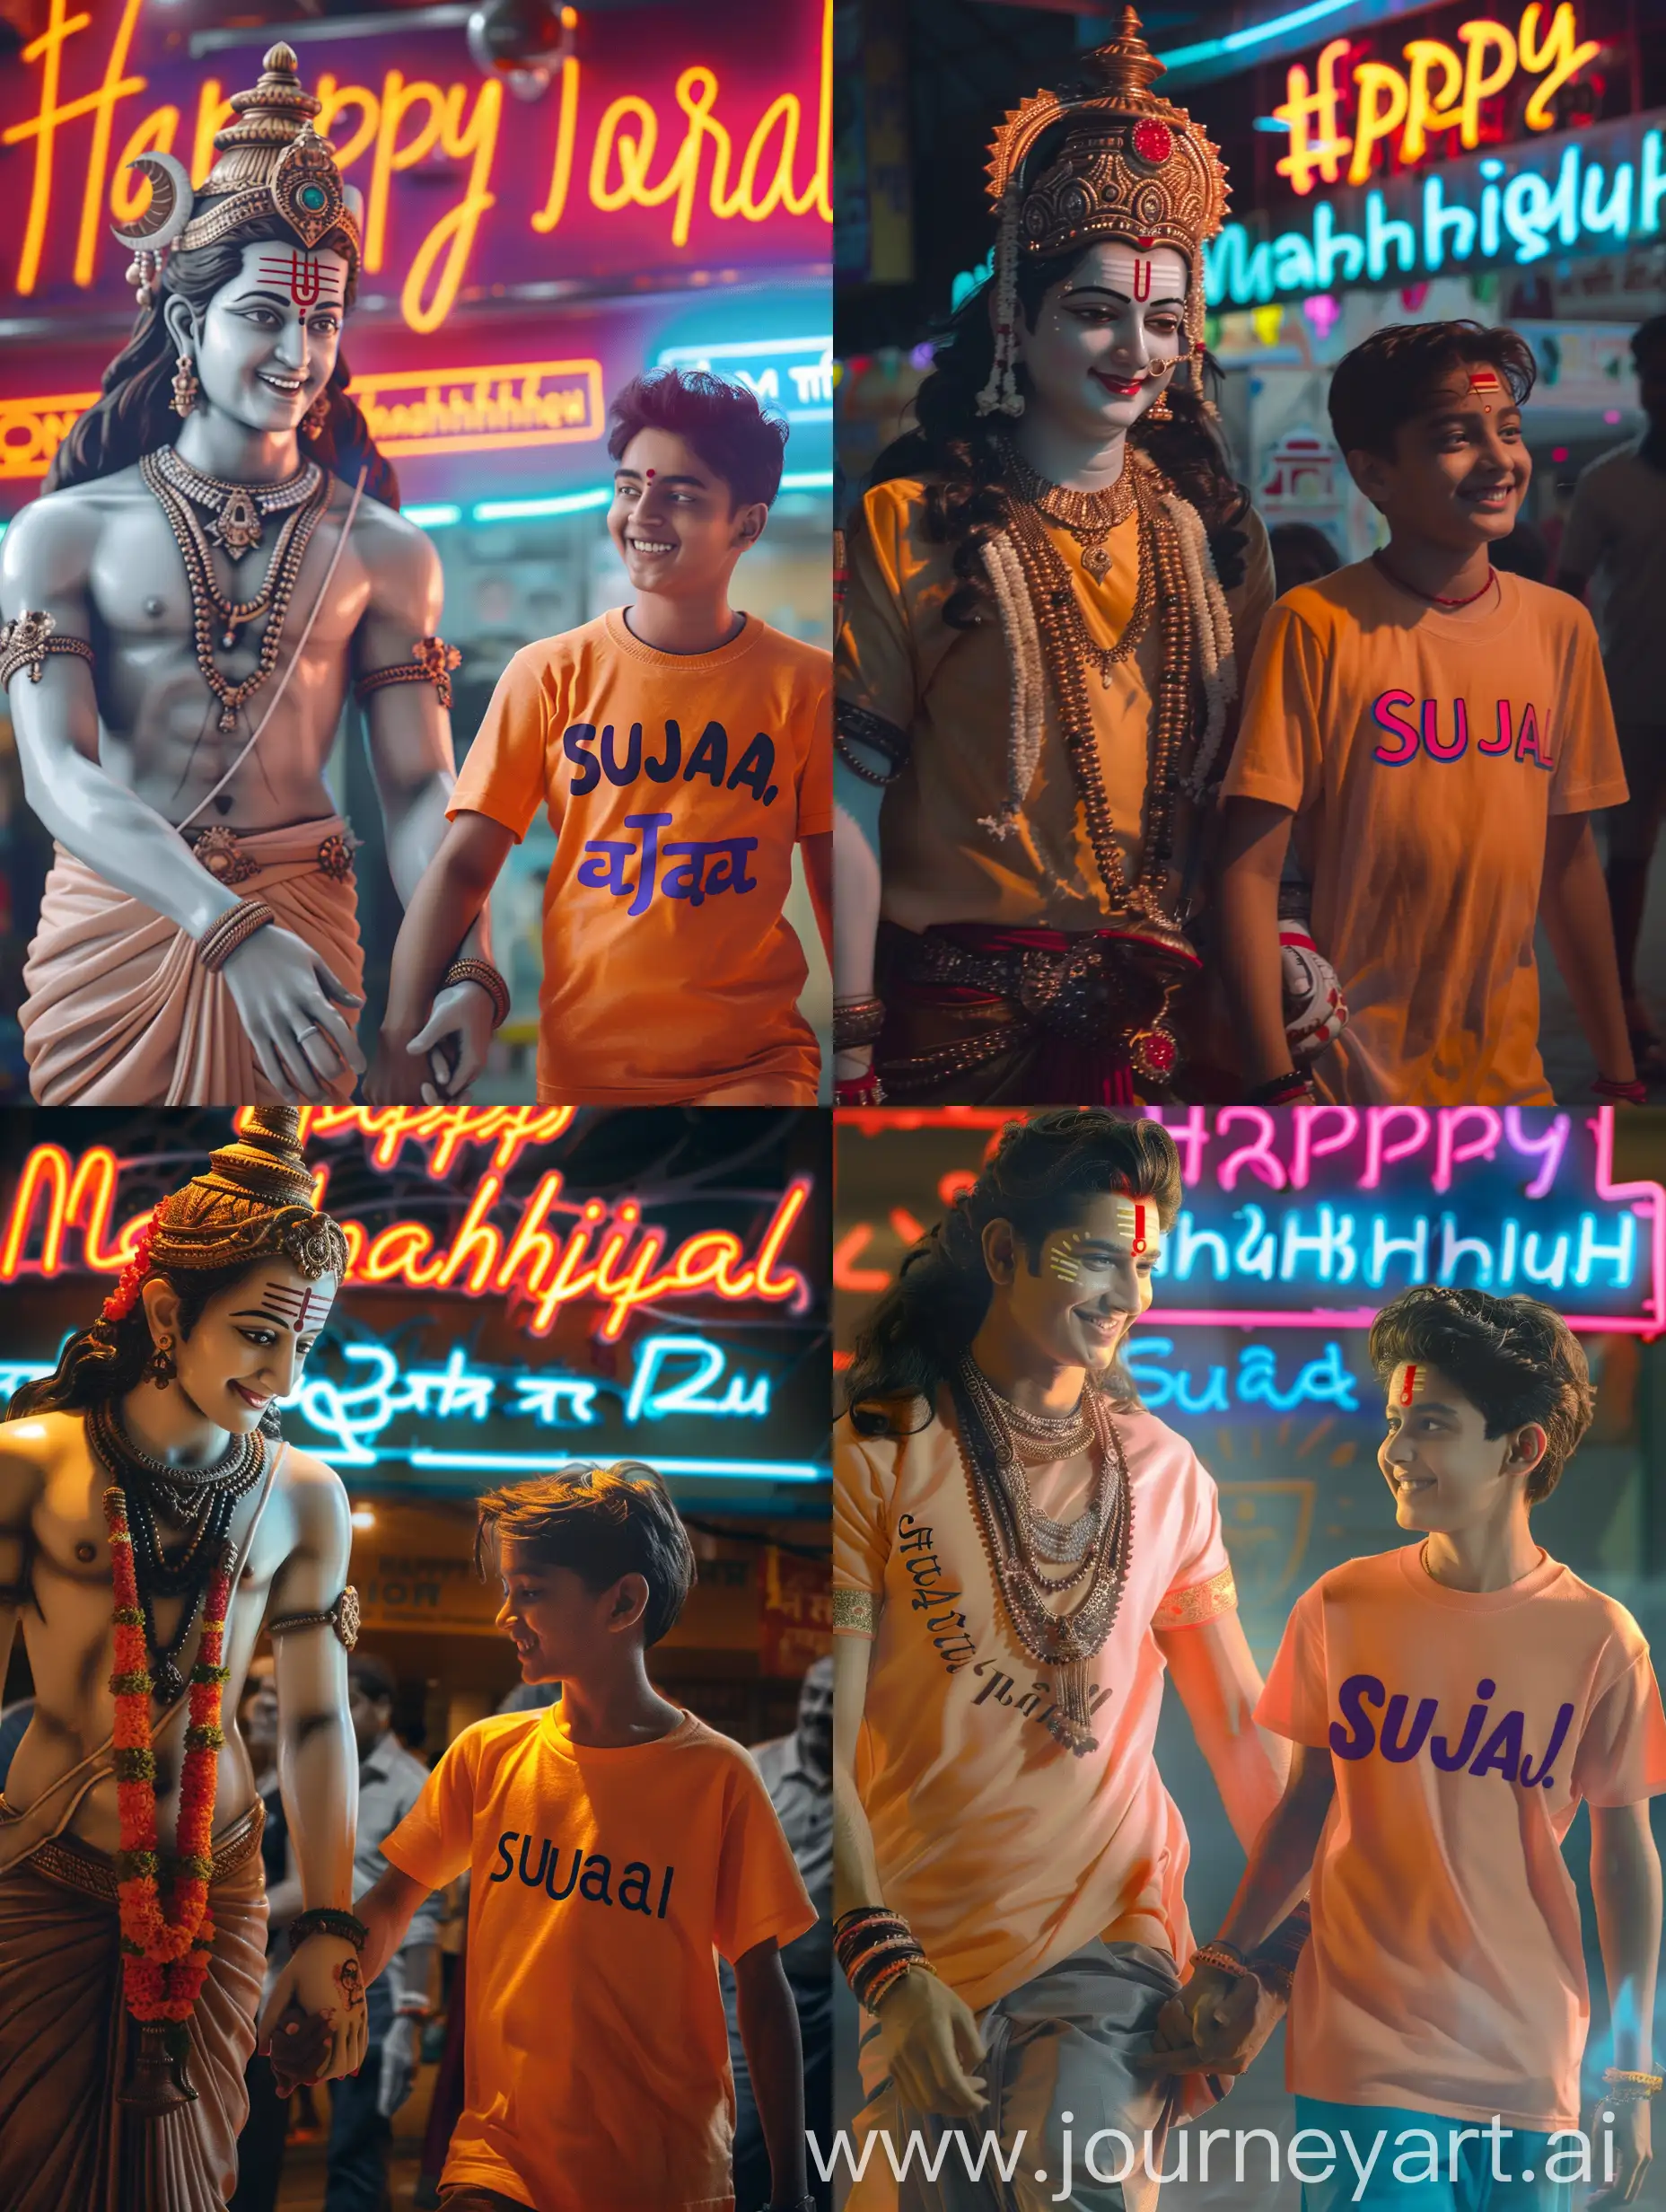 " Create an illusion the 25 year old boy closeup of lord Mahadev holding hand walking with a 20 year old boy wearing a saffron tshirt written name " Sujal " Big and capital font. both smiling. Background neon labels proudly display the caption " Happy Mahashivratri " , soft light reflection